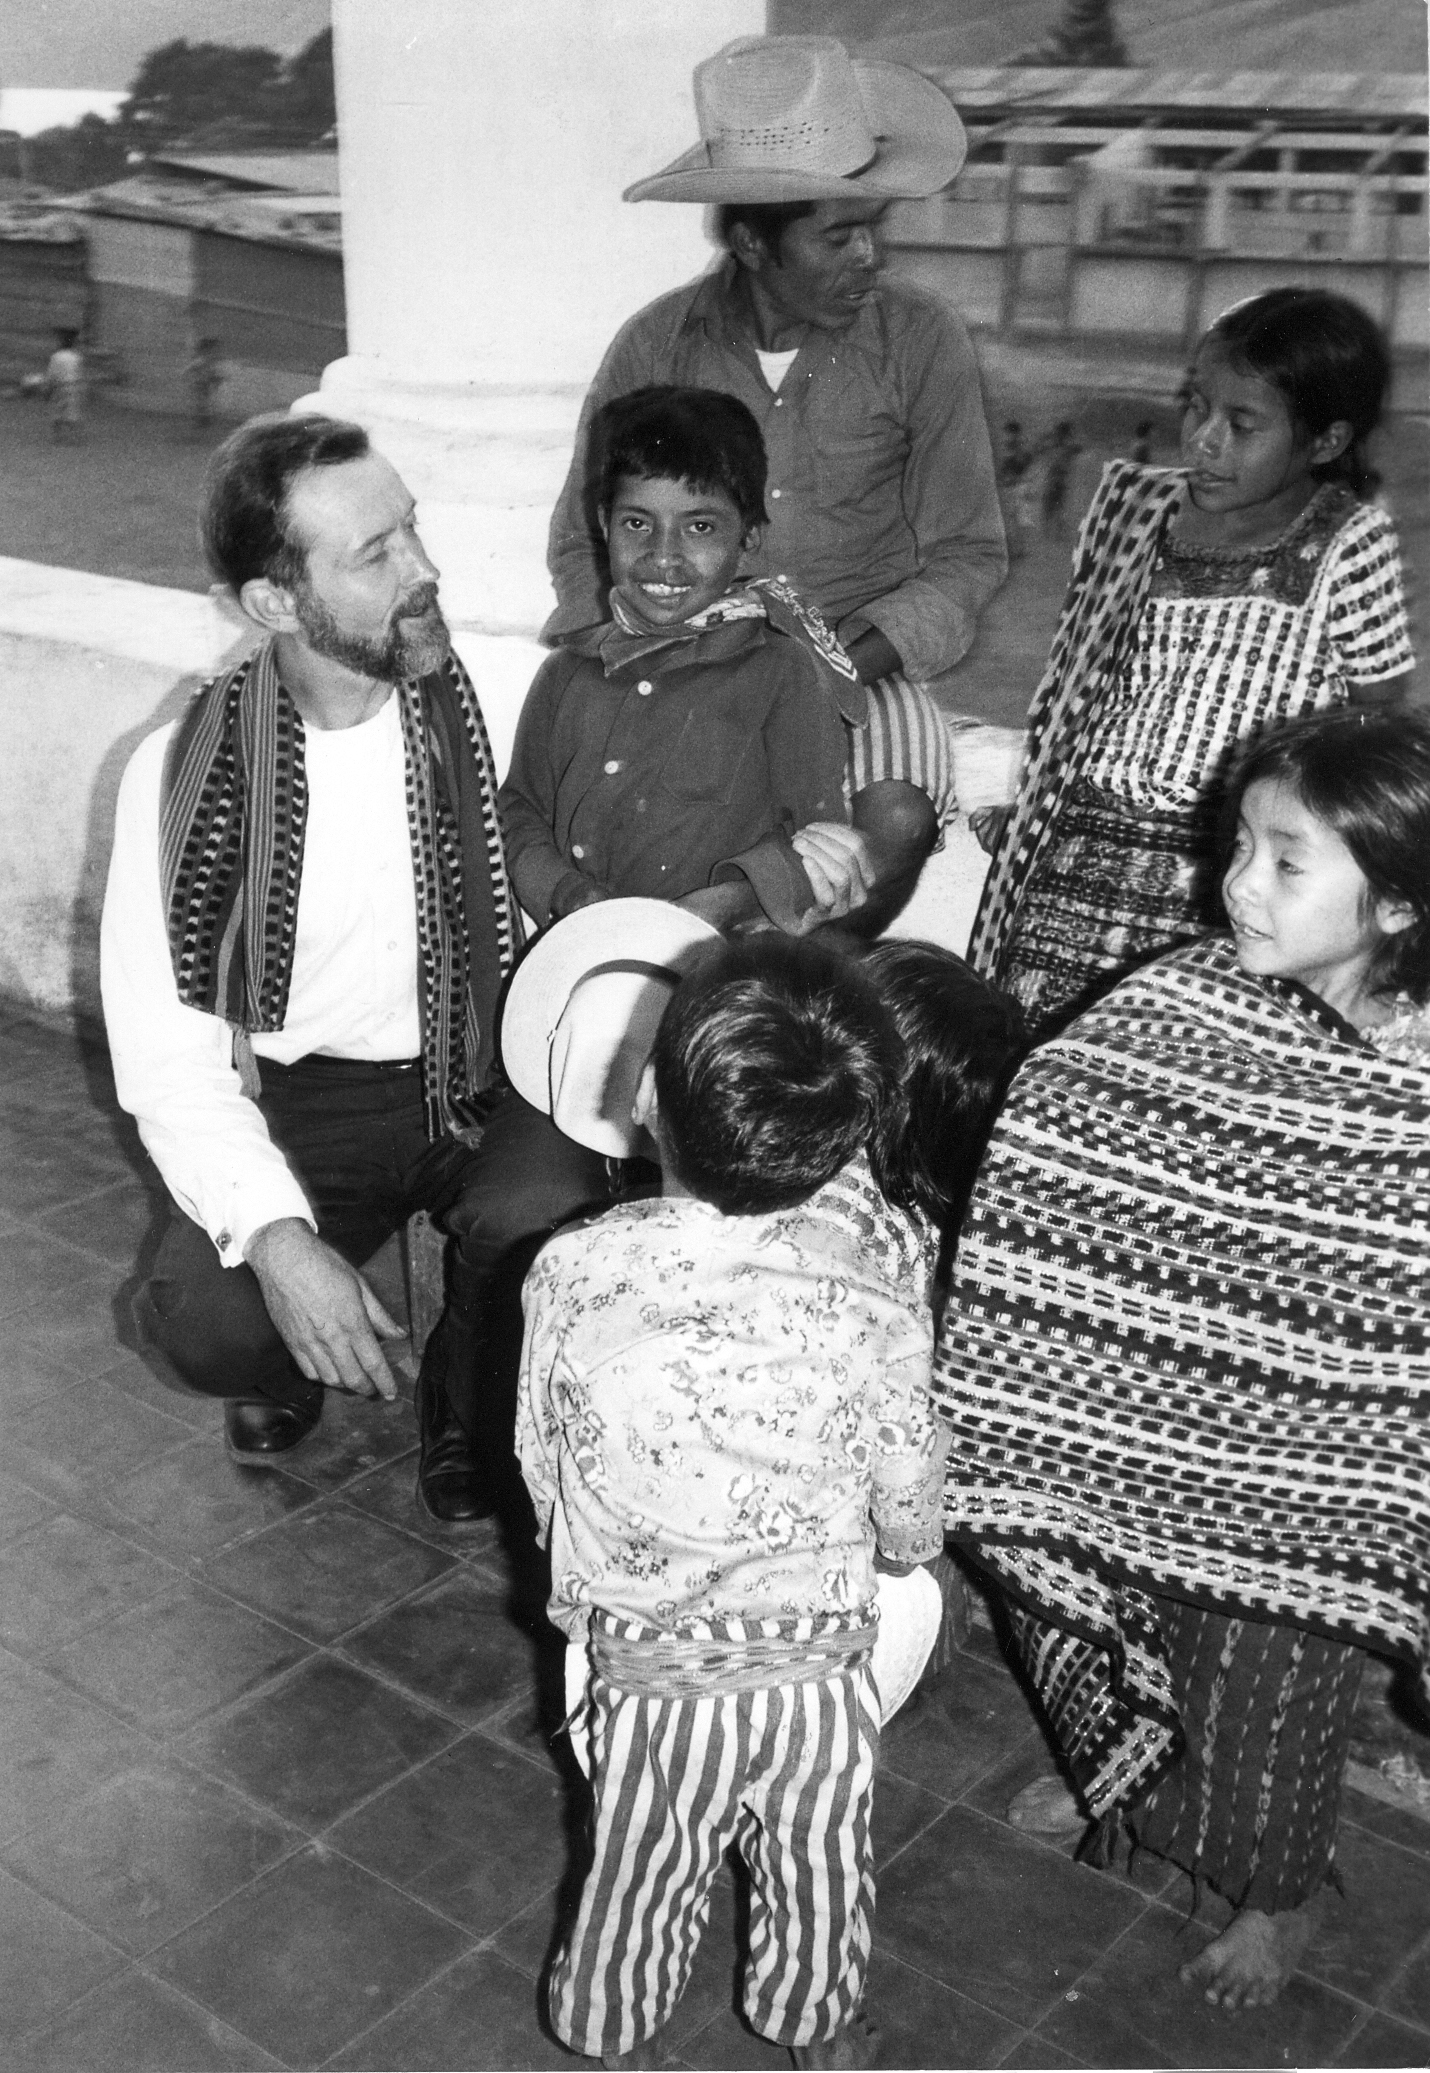 Father Stanley Rother, a priest of the Oklahoma City Archdiocese who was brutally murdered in 1981 in the Guatemalan village where he ministered to the poor, is pictured in an undated photo. The Archdiocese of Oklahoma City announced the North American priest will be beatified Sept. 23 in Oklahoma. (CNS photo/Archdiocese of Oklahoma City archives)